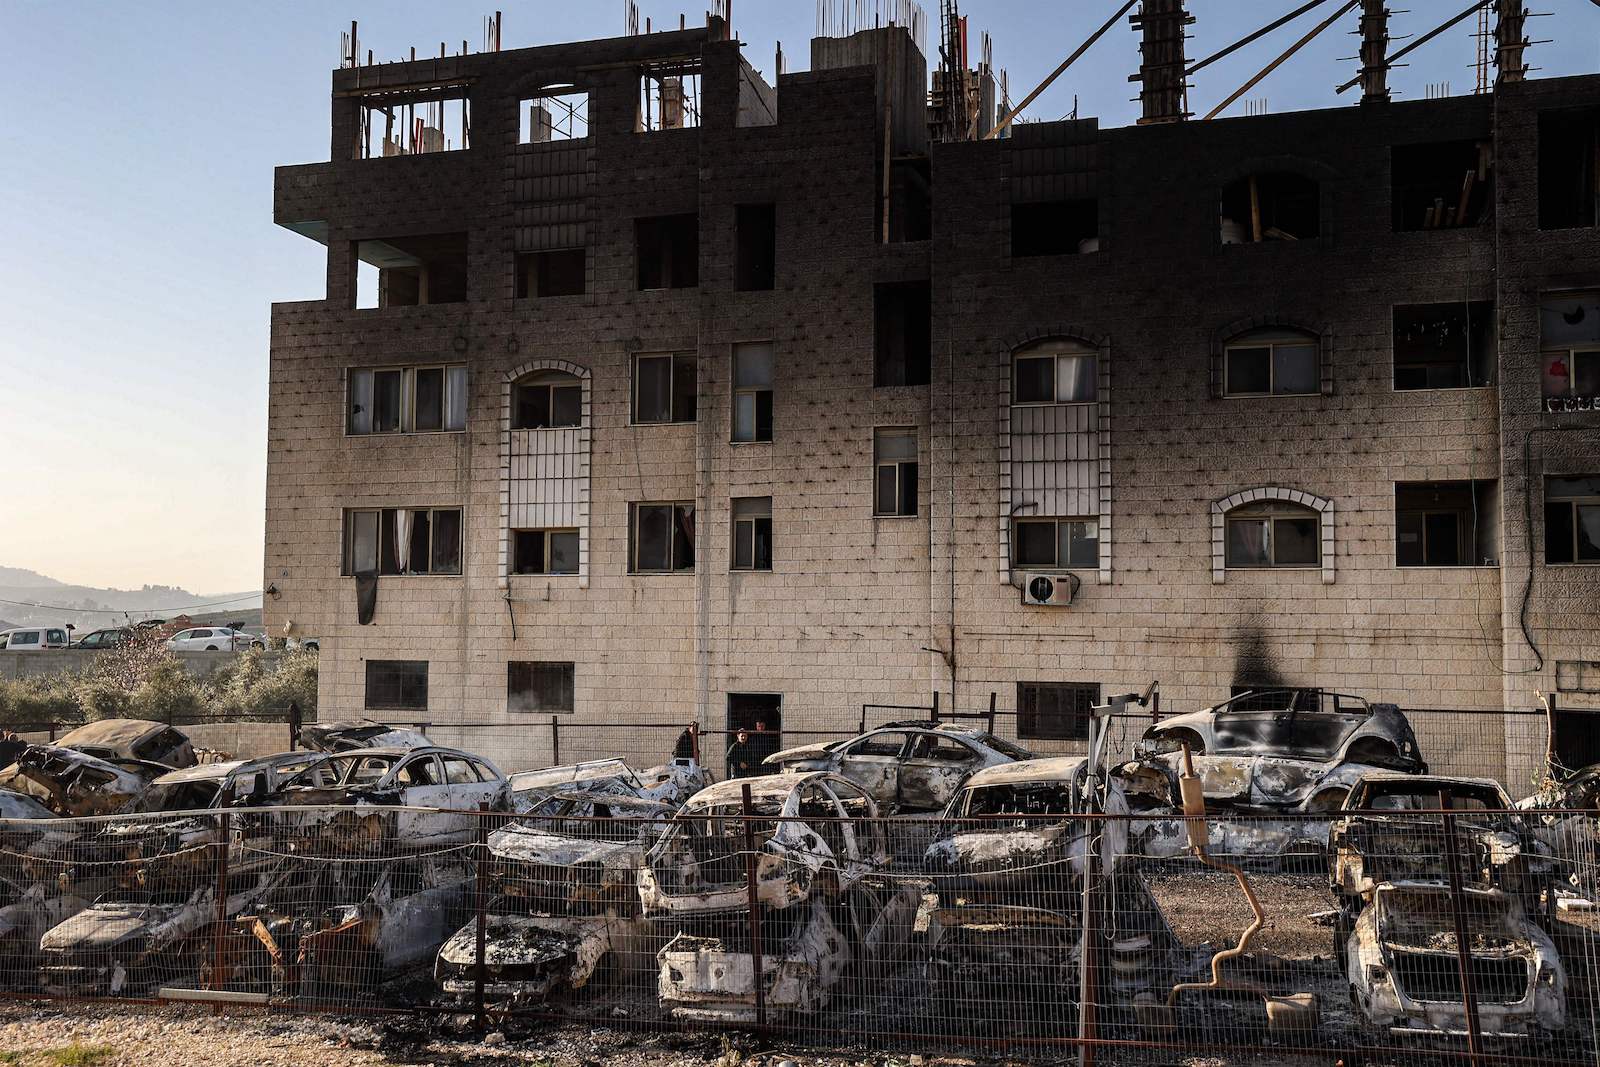 The charred ruins of a building surrounded by burnt-out cars